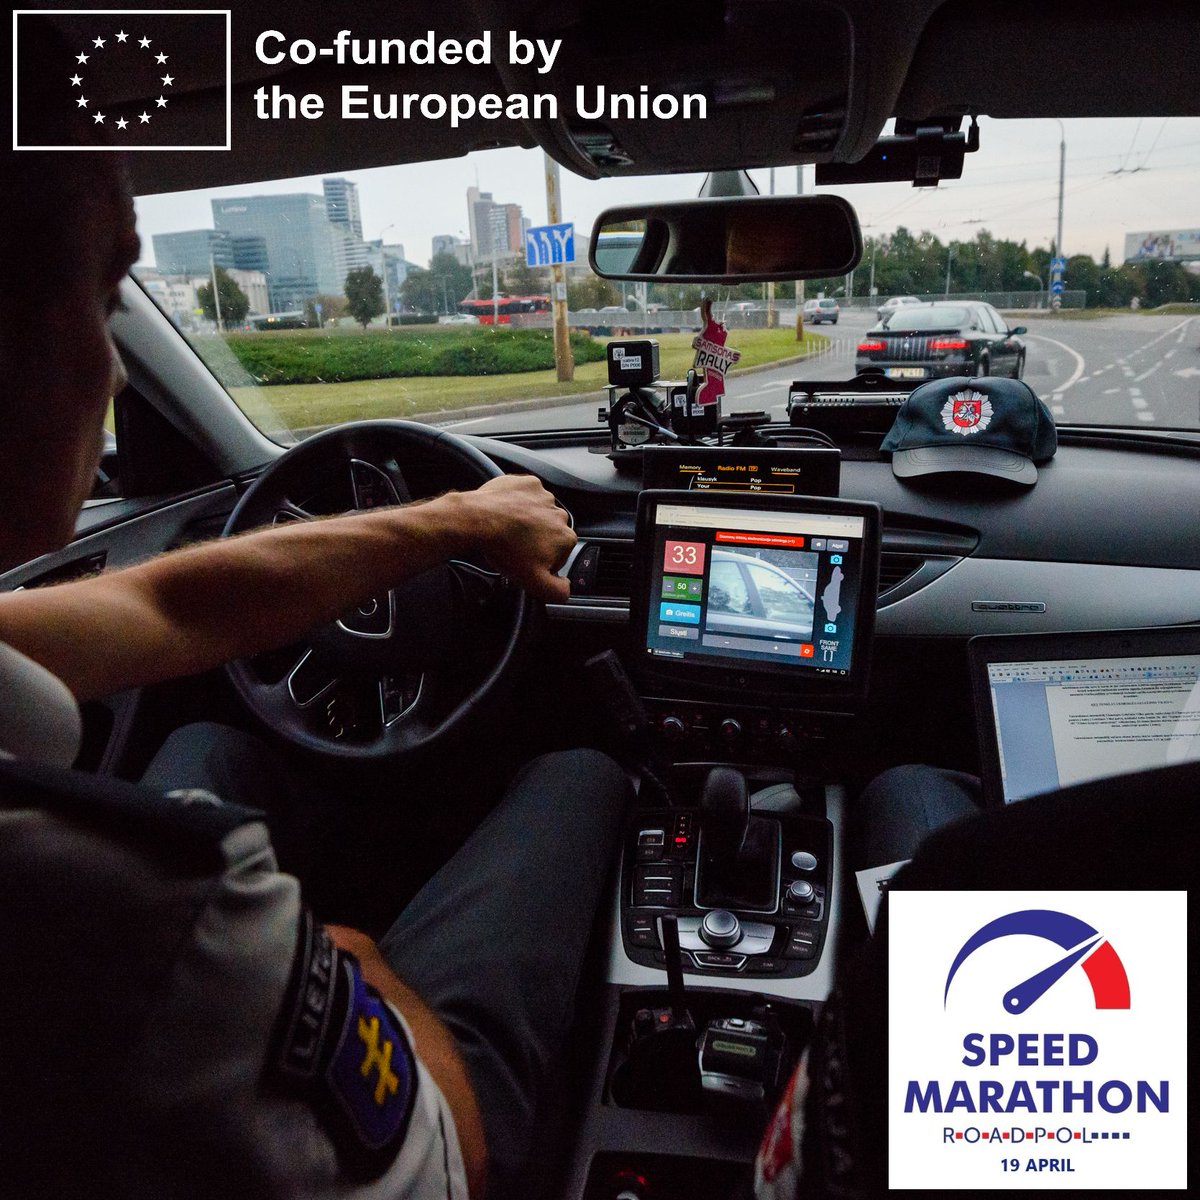 👮‍♀️ 👮‍♂️ We control speed every day. So what is different on #SpeedMarathon? 🚔 It's that all our technical and human resources are more massively than ever allocated to target speeders 📢 We want all communities to speak and think of the consequences of speeding #police #roadsafety